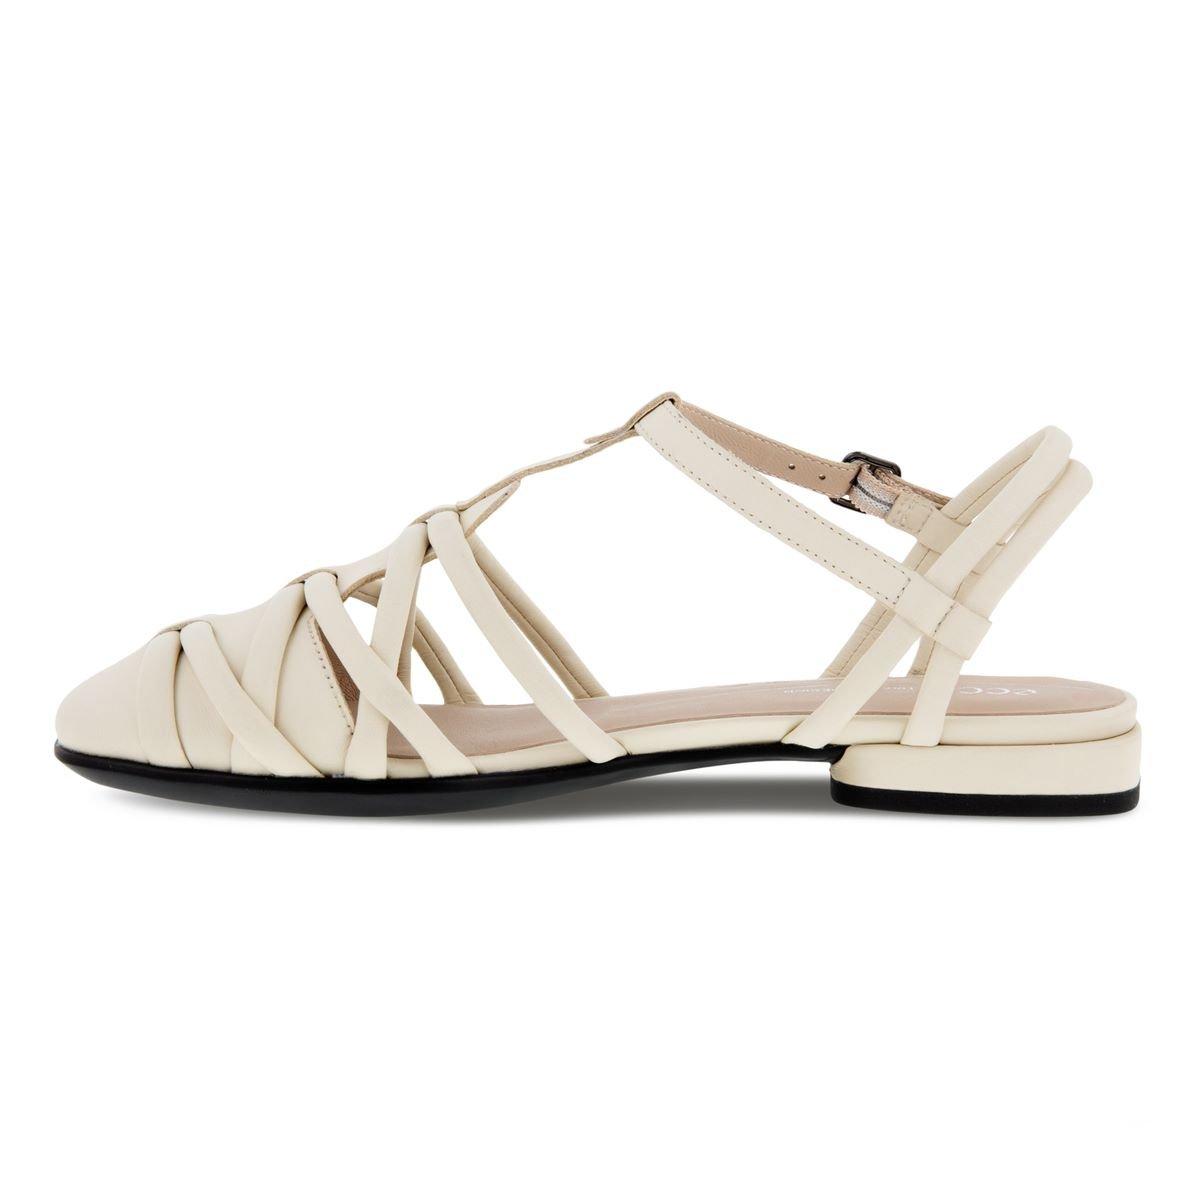 GIÀY SANDALS ECCO NỮ ANINE SQUARED